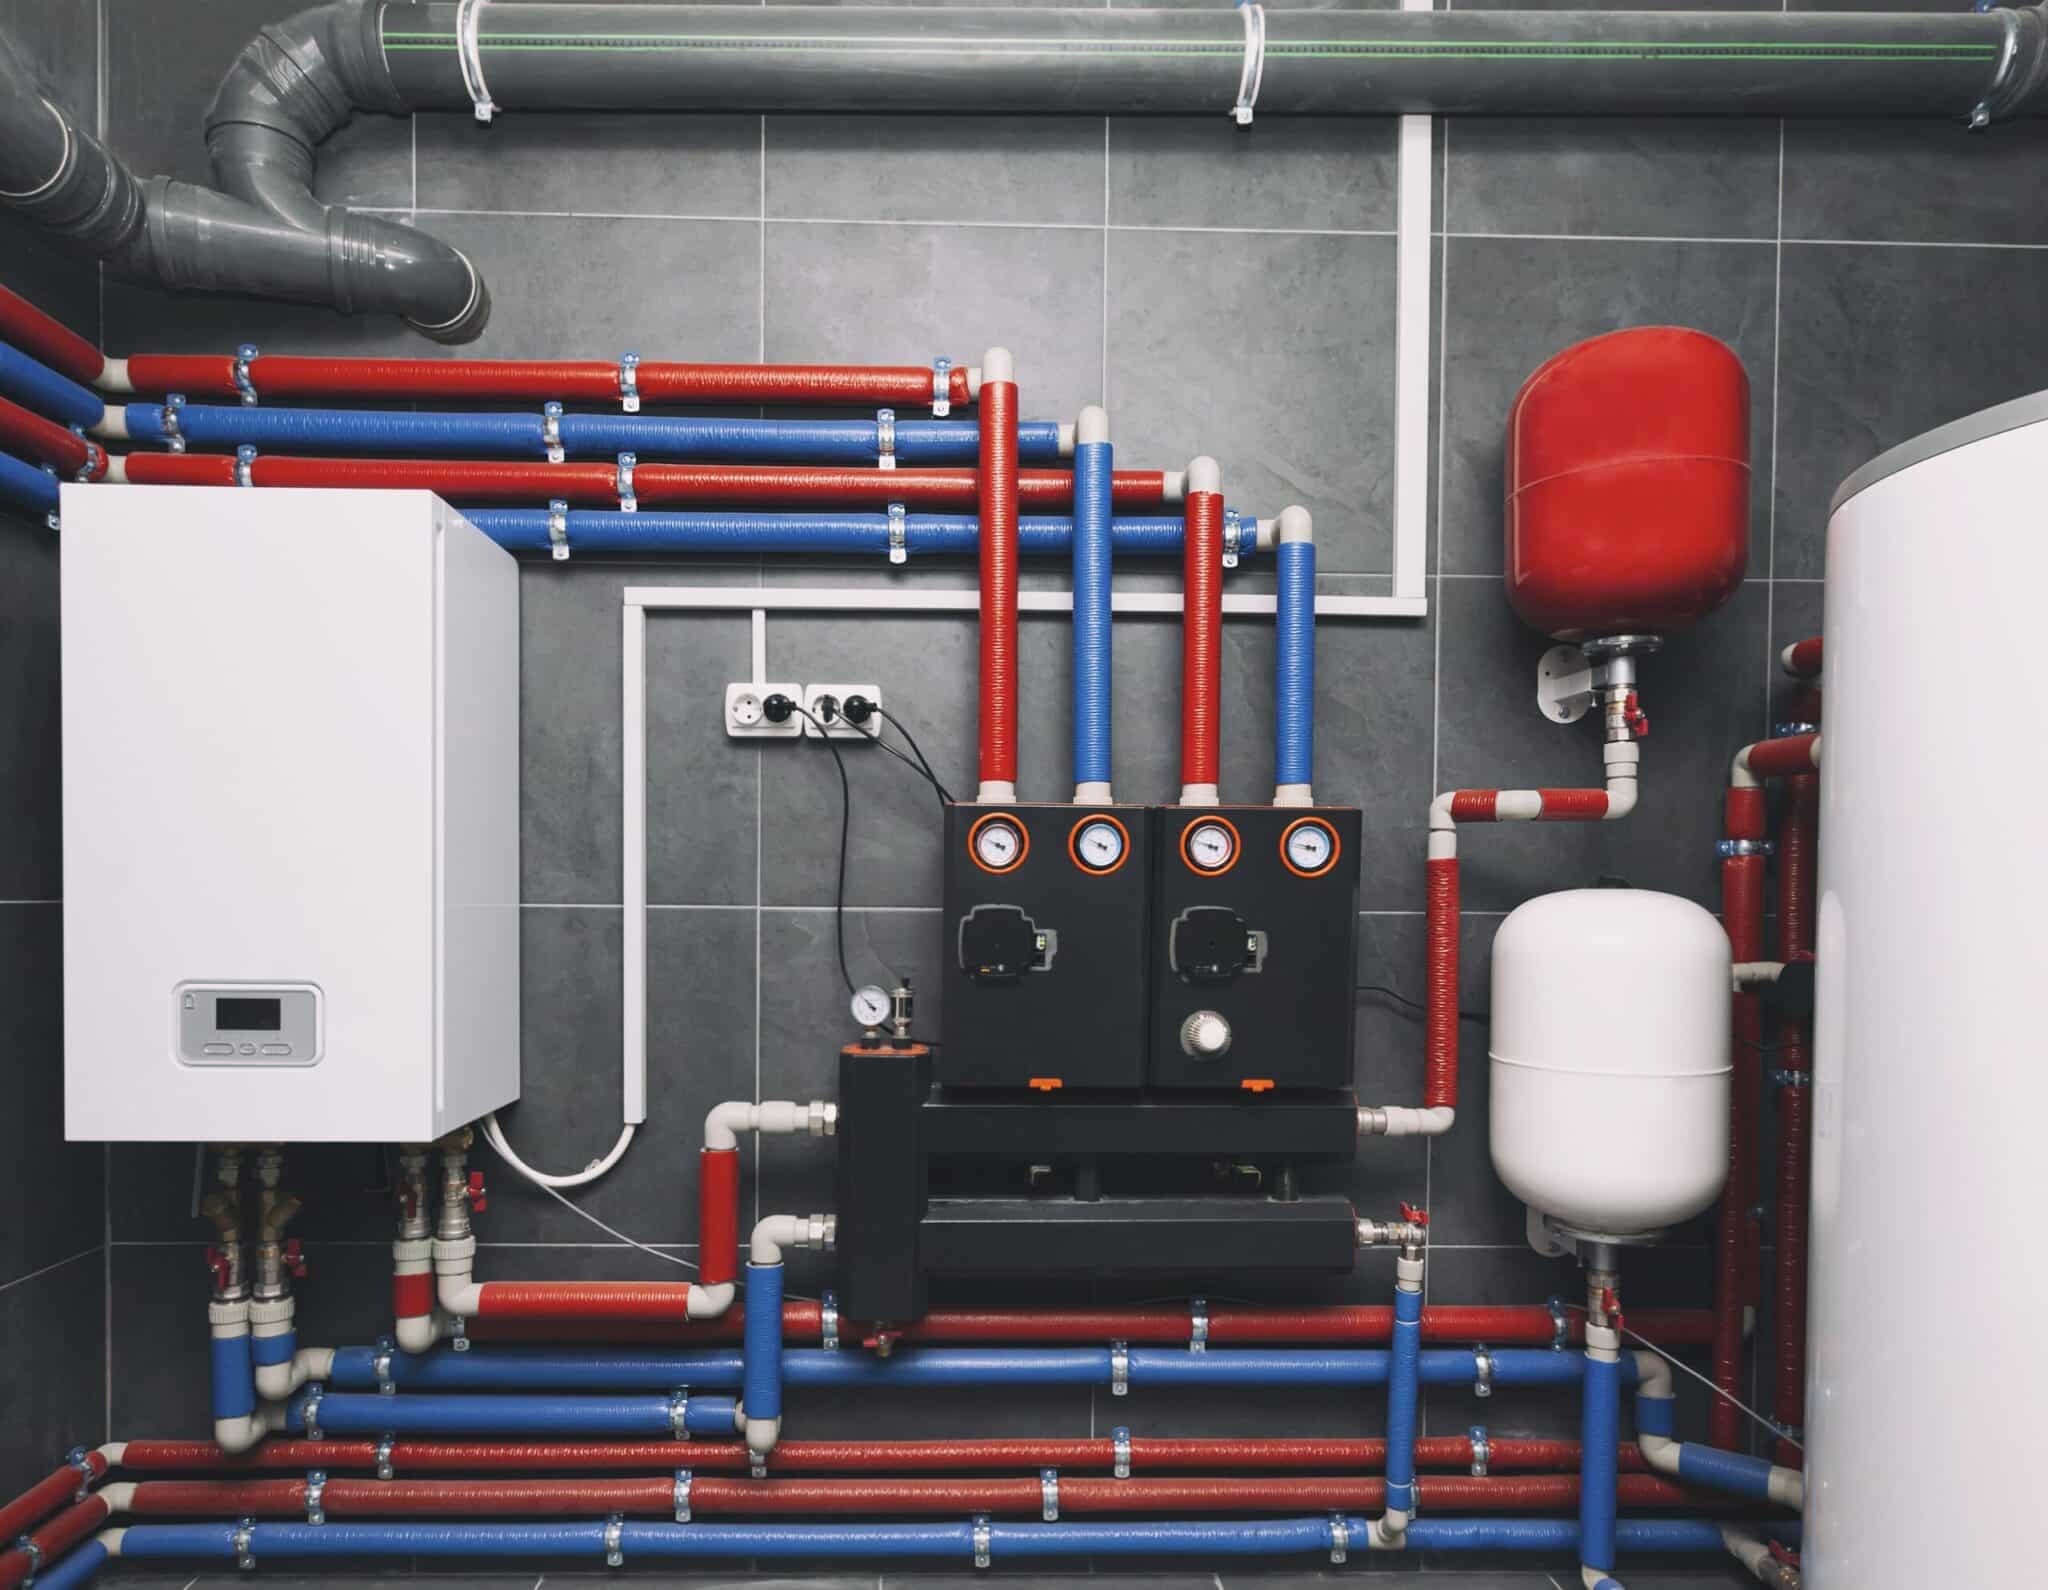 A Modern Electric Boiler Room: Equipment for a Modern Heating System including a Boiler, Heater, Pipes, Expansion Tank, and Other Components by Benjamin Franklin Plumbing in Prescott, AZ